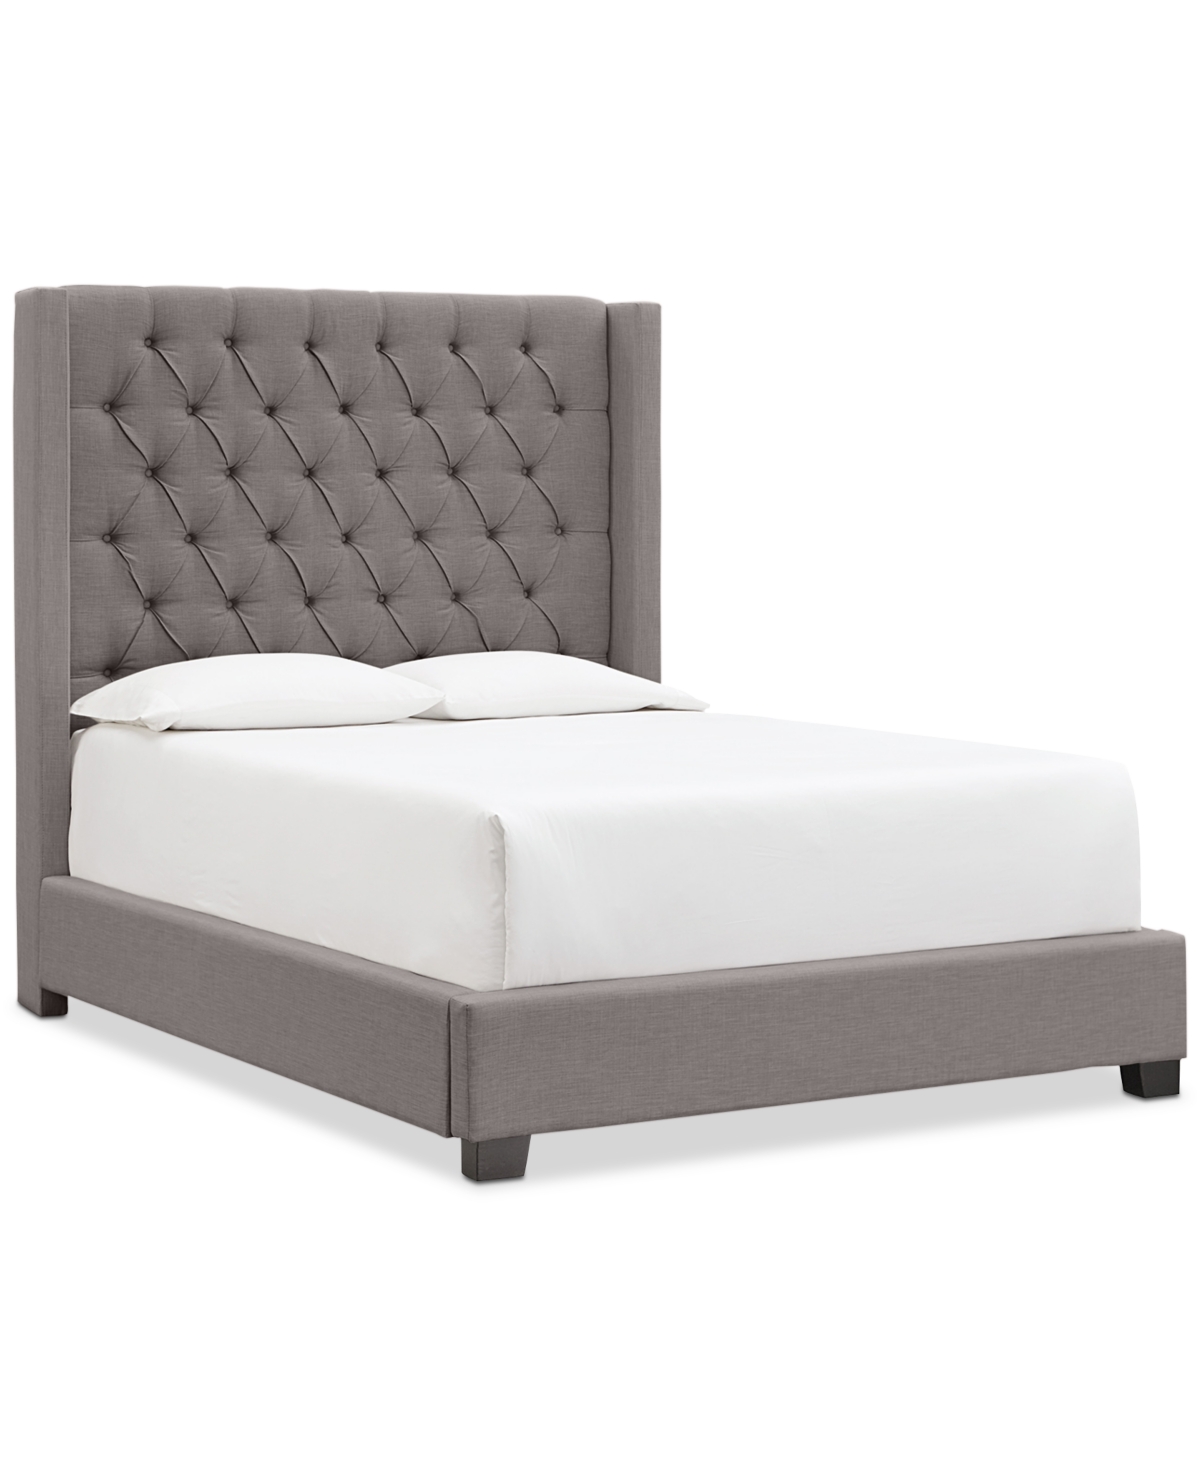 Shop Furniture Monroe Ii Upholstered California King Bed, Created For Macy's In Grey